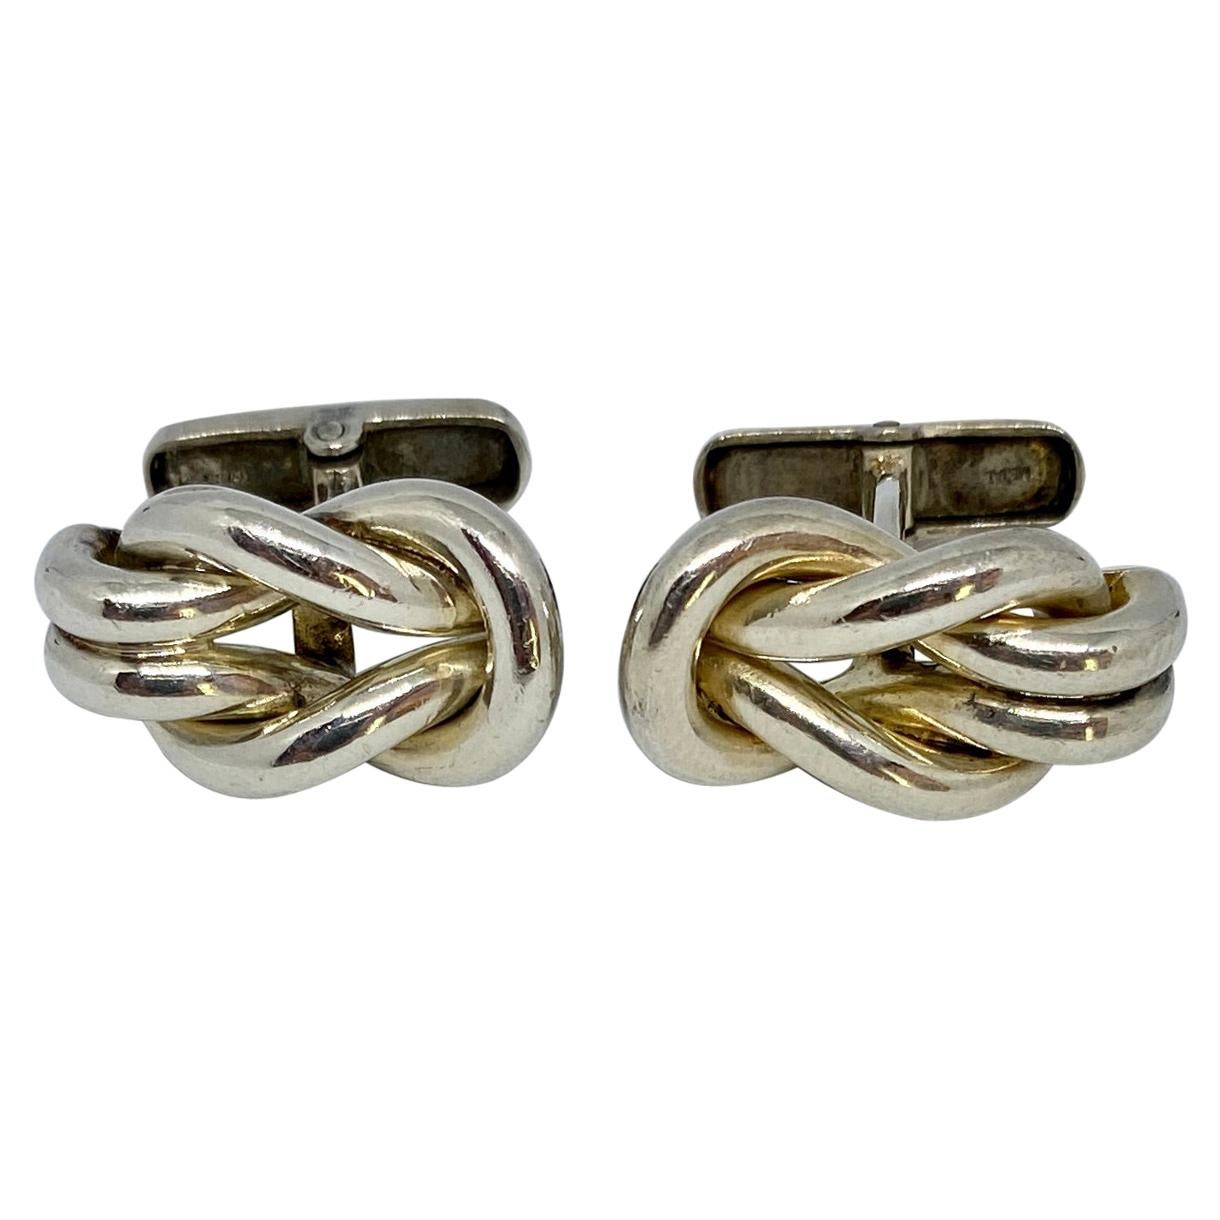 Hercules Knot Cufflinks in Sterling Silver by Ilias Lalaounis